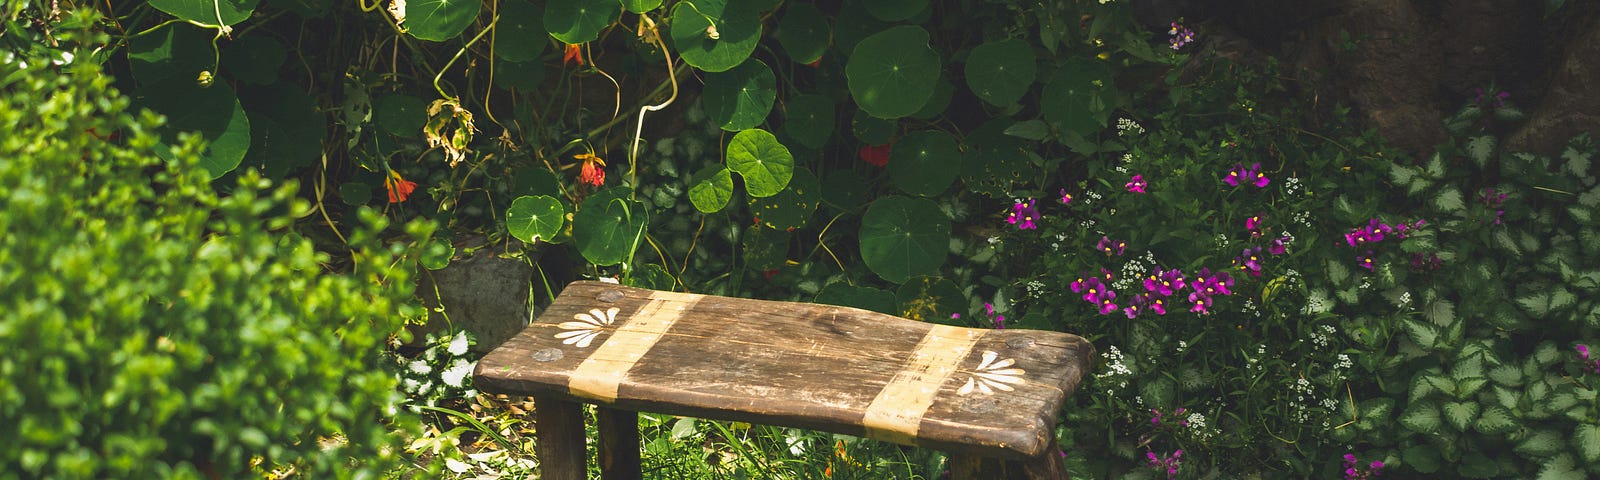 A small brown wooden bench/stool in a lush green garden with small flowers in the background.